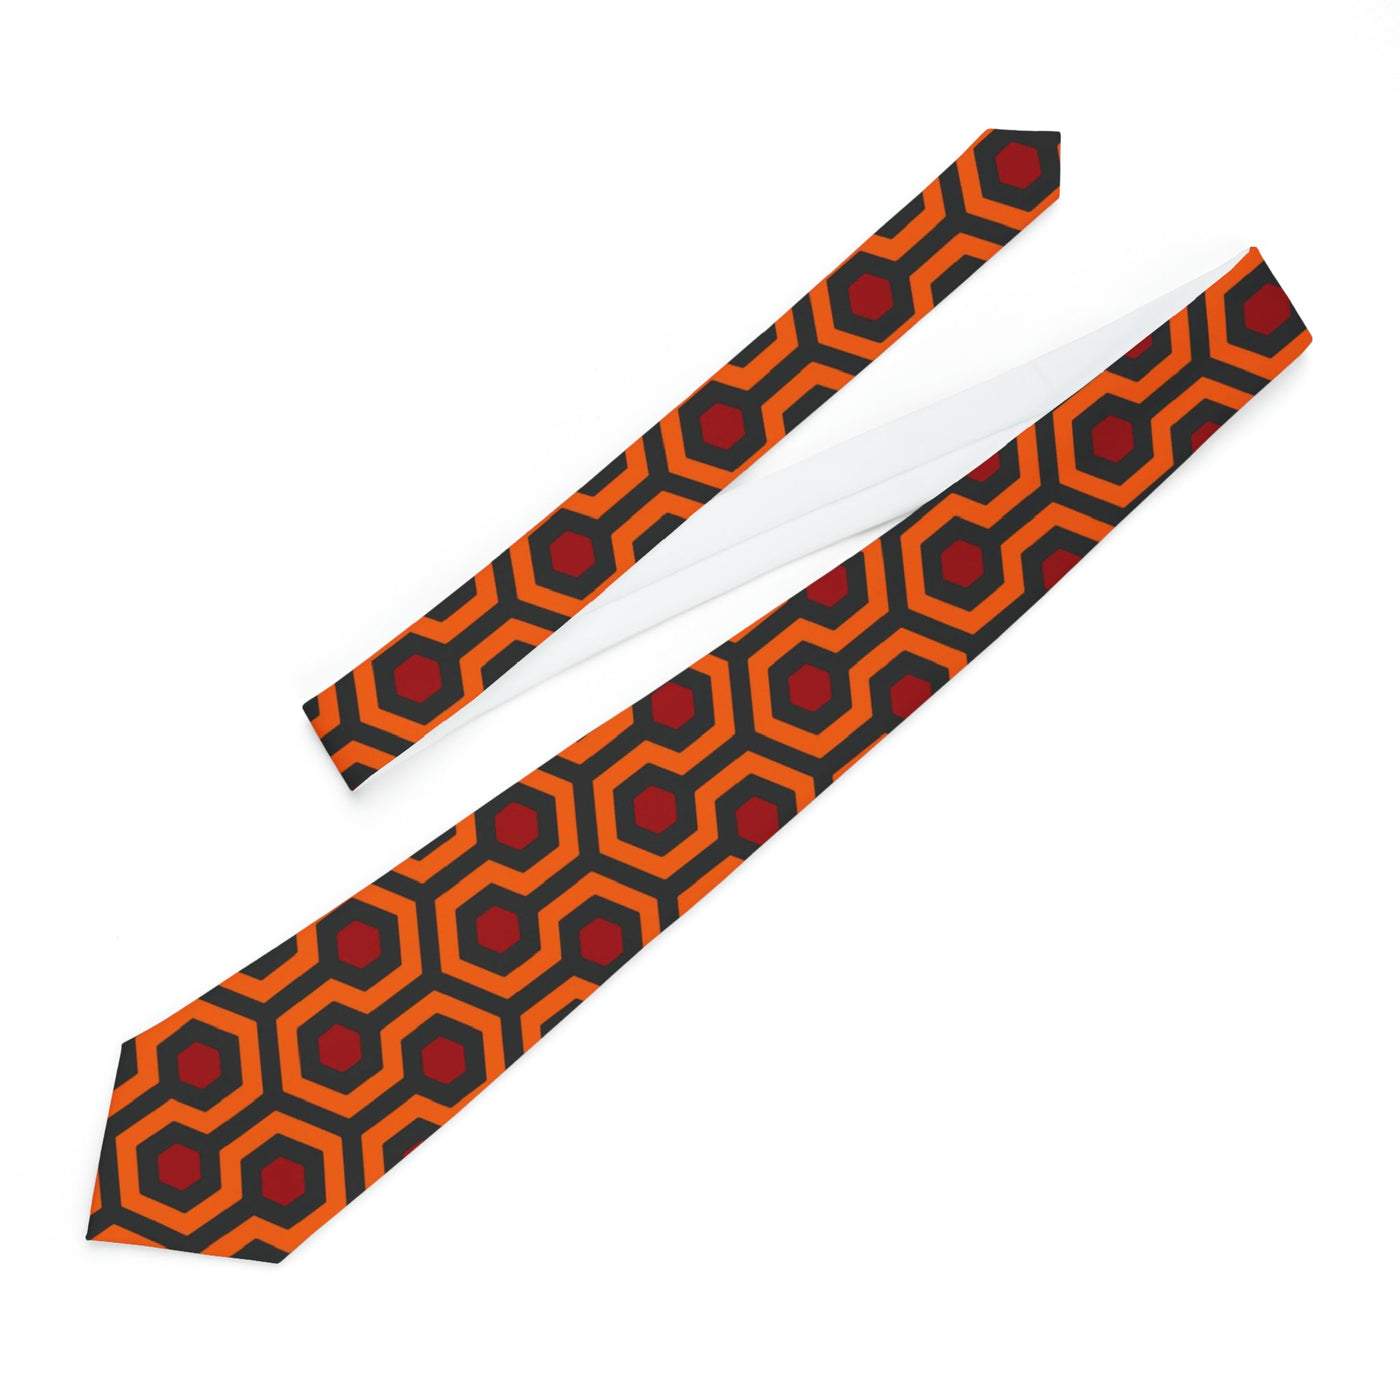 The Shining Necktie with Overlook Hotel Carpet Pattern